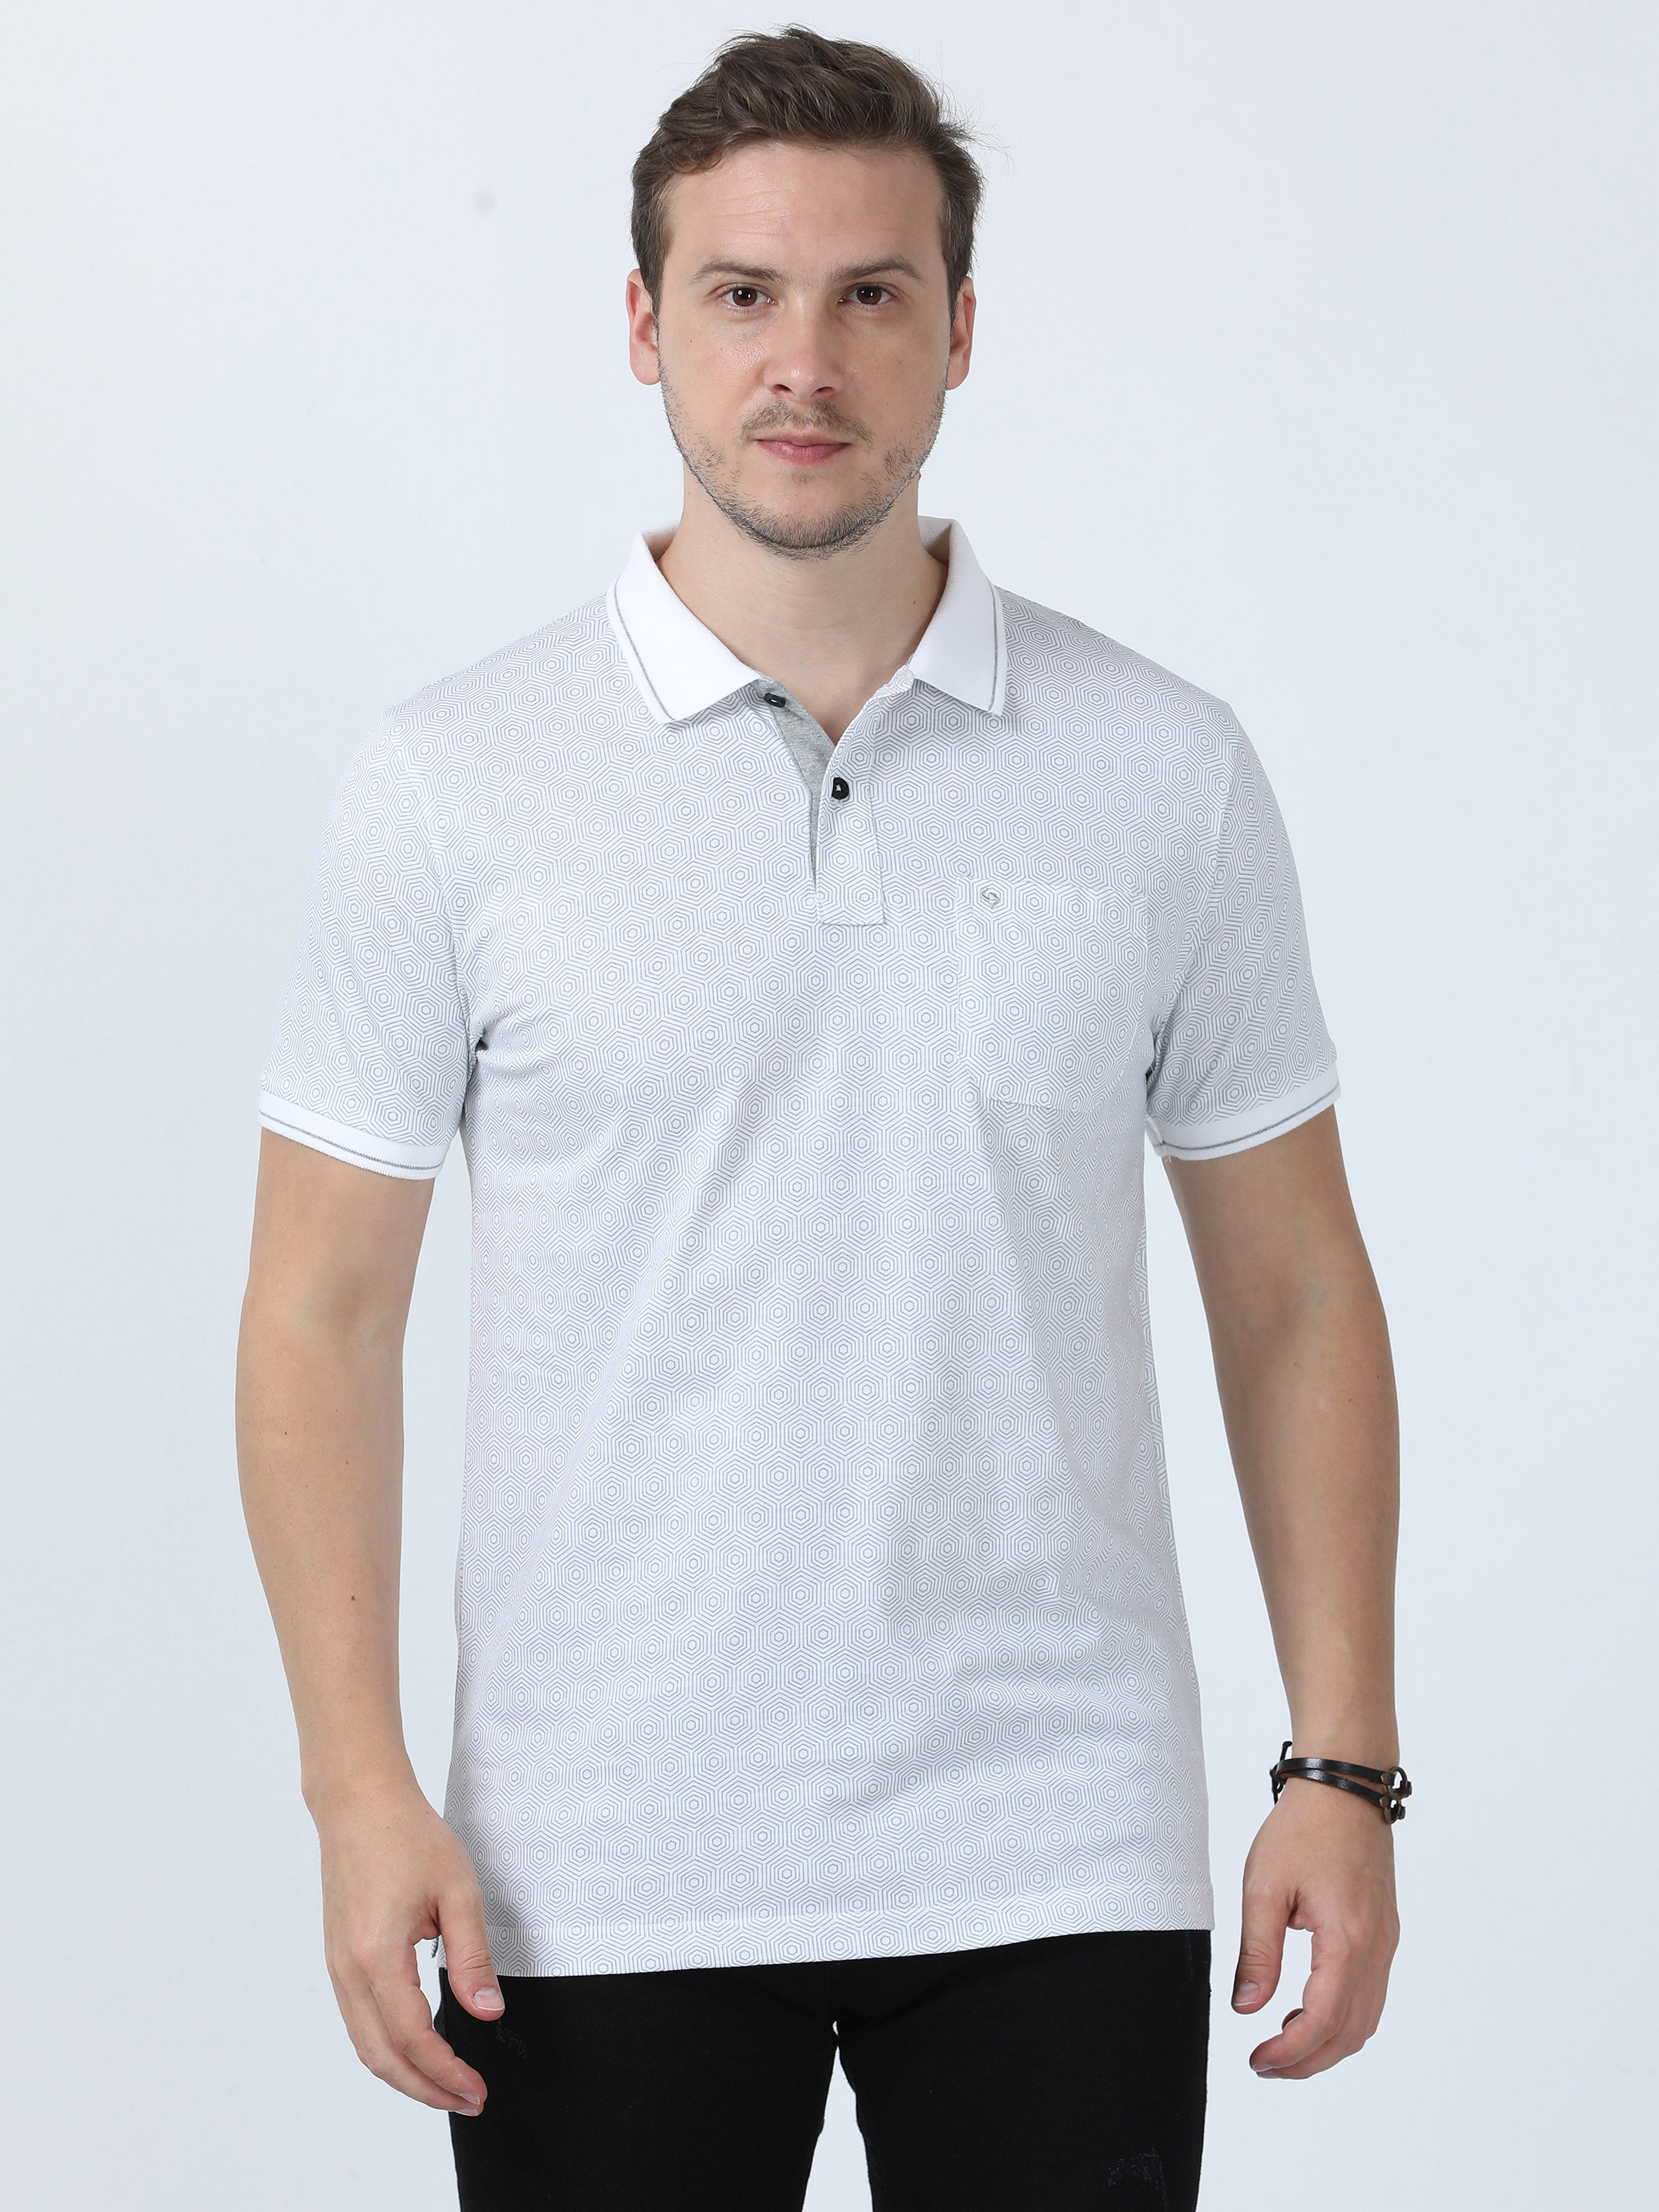 Polo t shirt for men - Buy Casual, Sporty, Printed, Round Neck Online